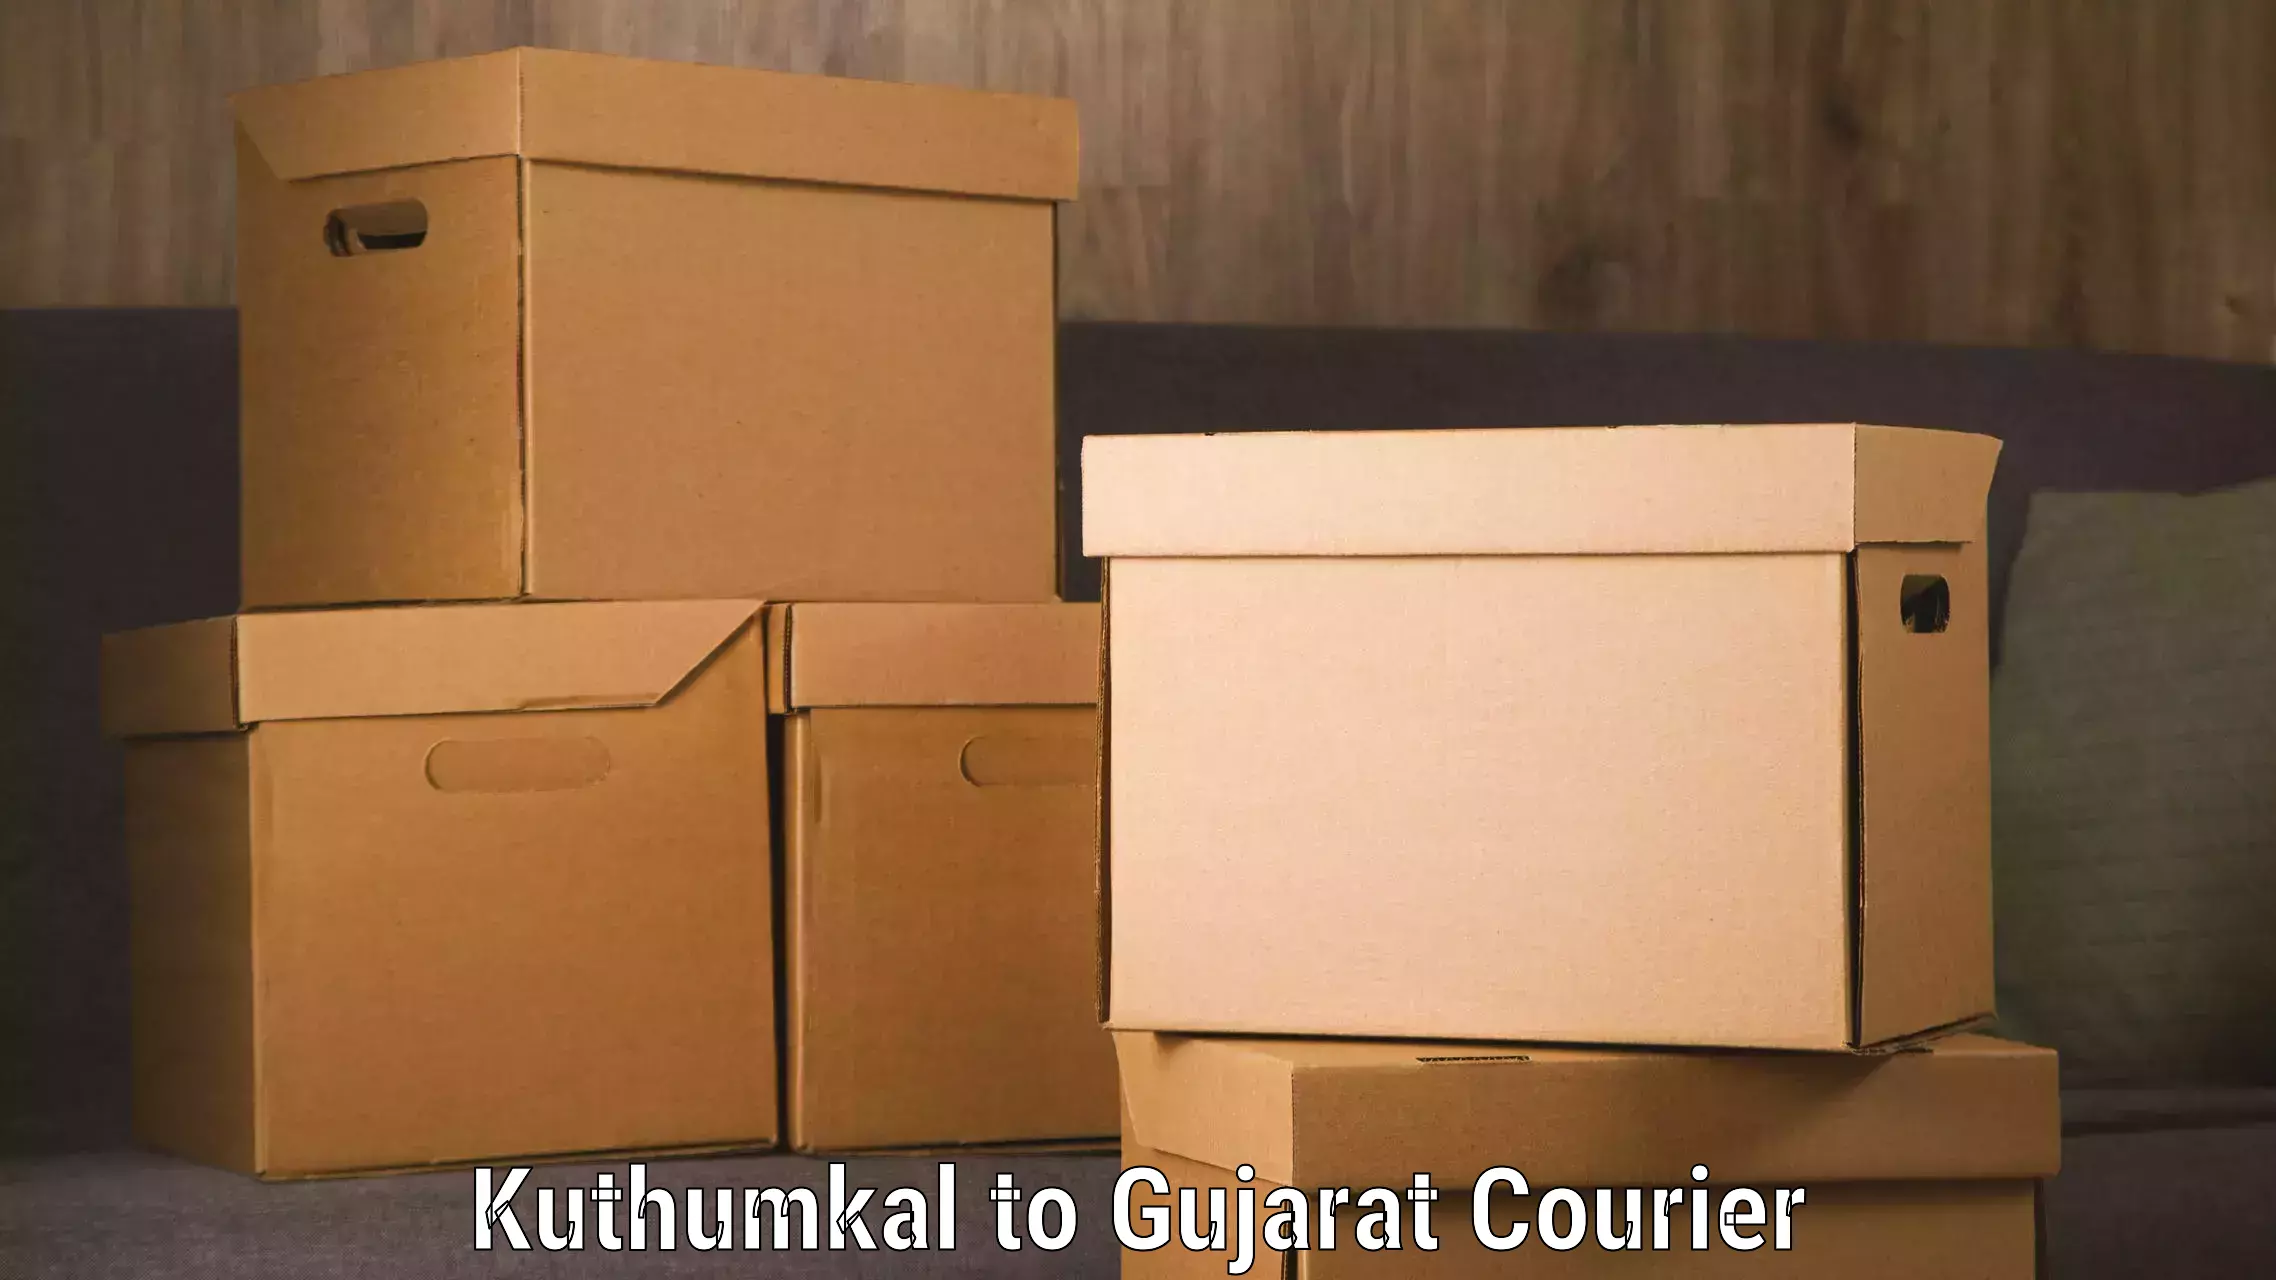 Express courier capabilities Kuthumkal to Ahmedabad